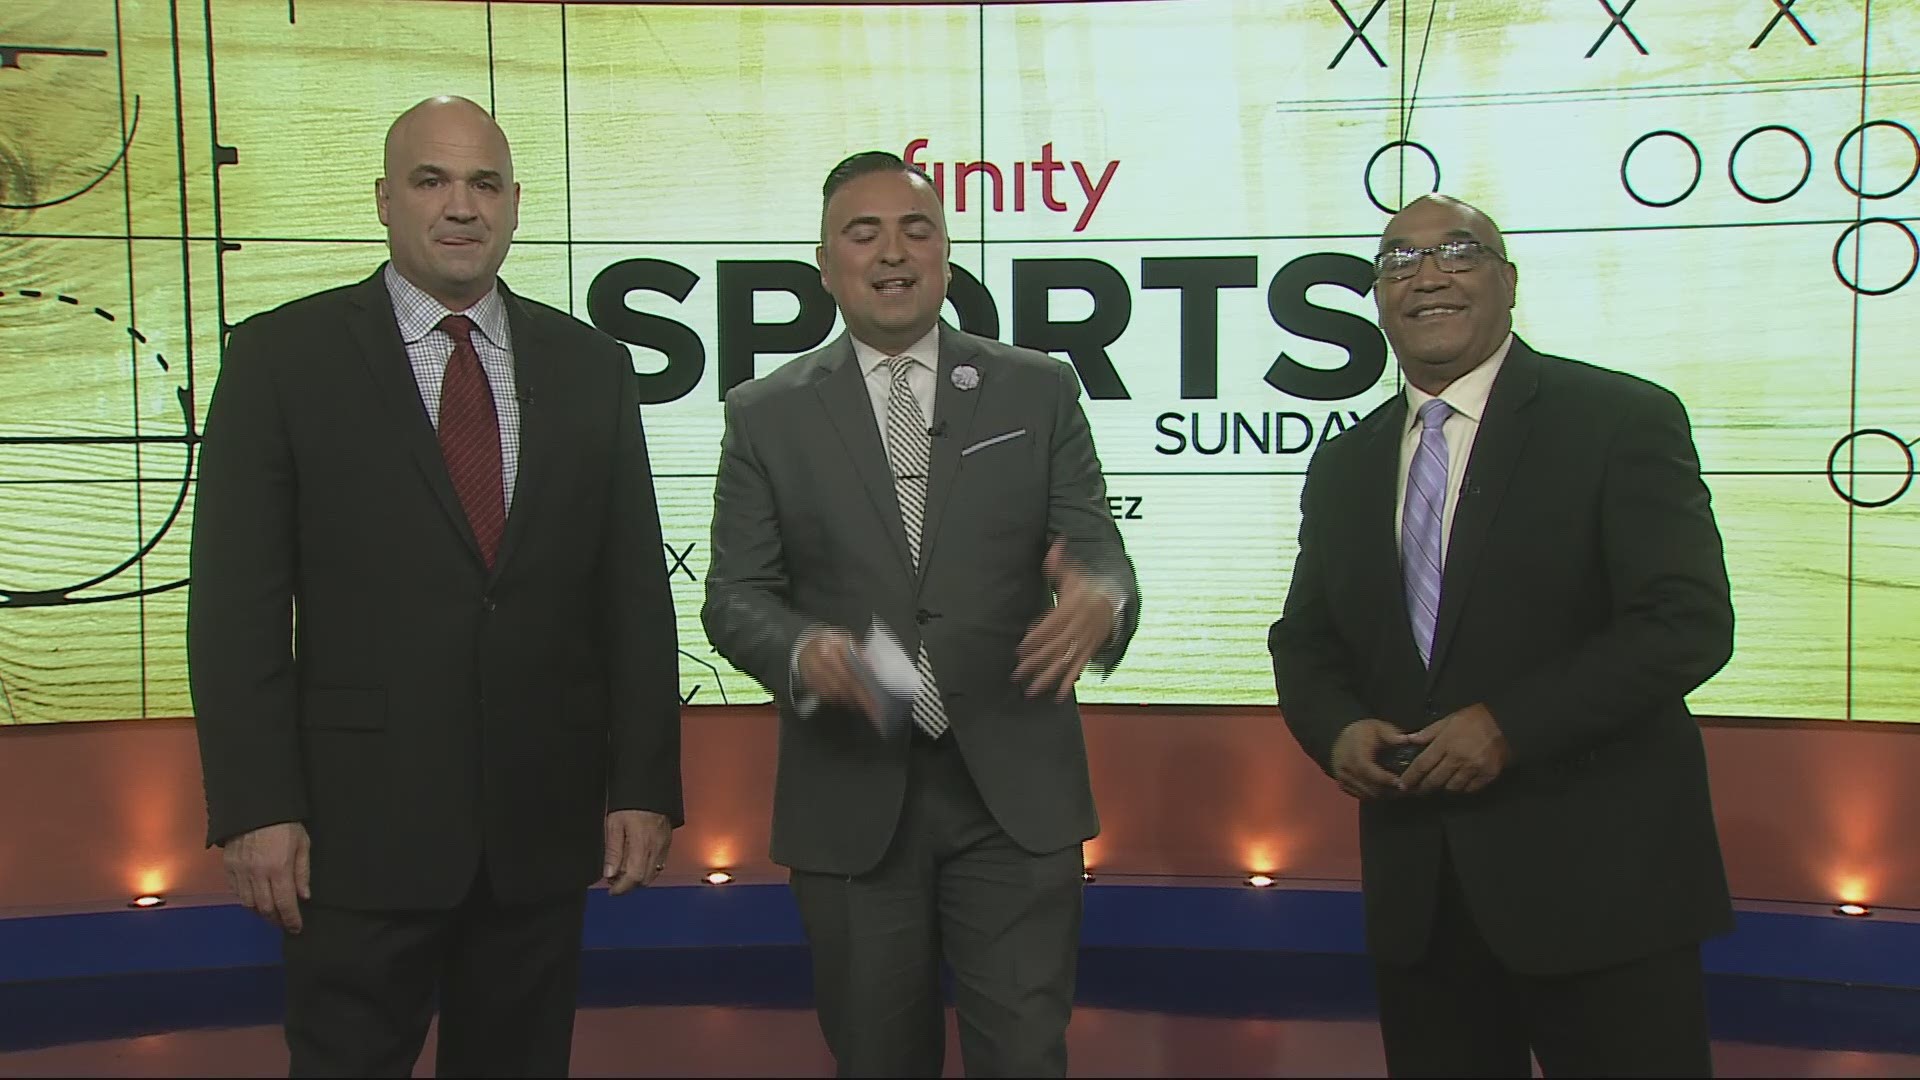 KGW's Orlando Sanchez, John Canzano and Art Edwards discuss the upcoming NBA season and the outlook for the Portland Trail Blazers.